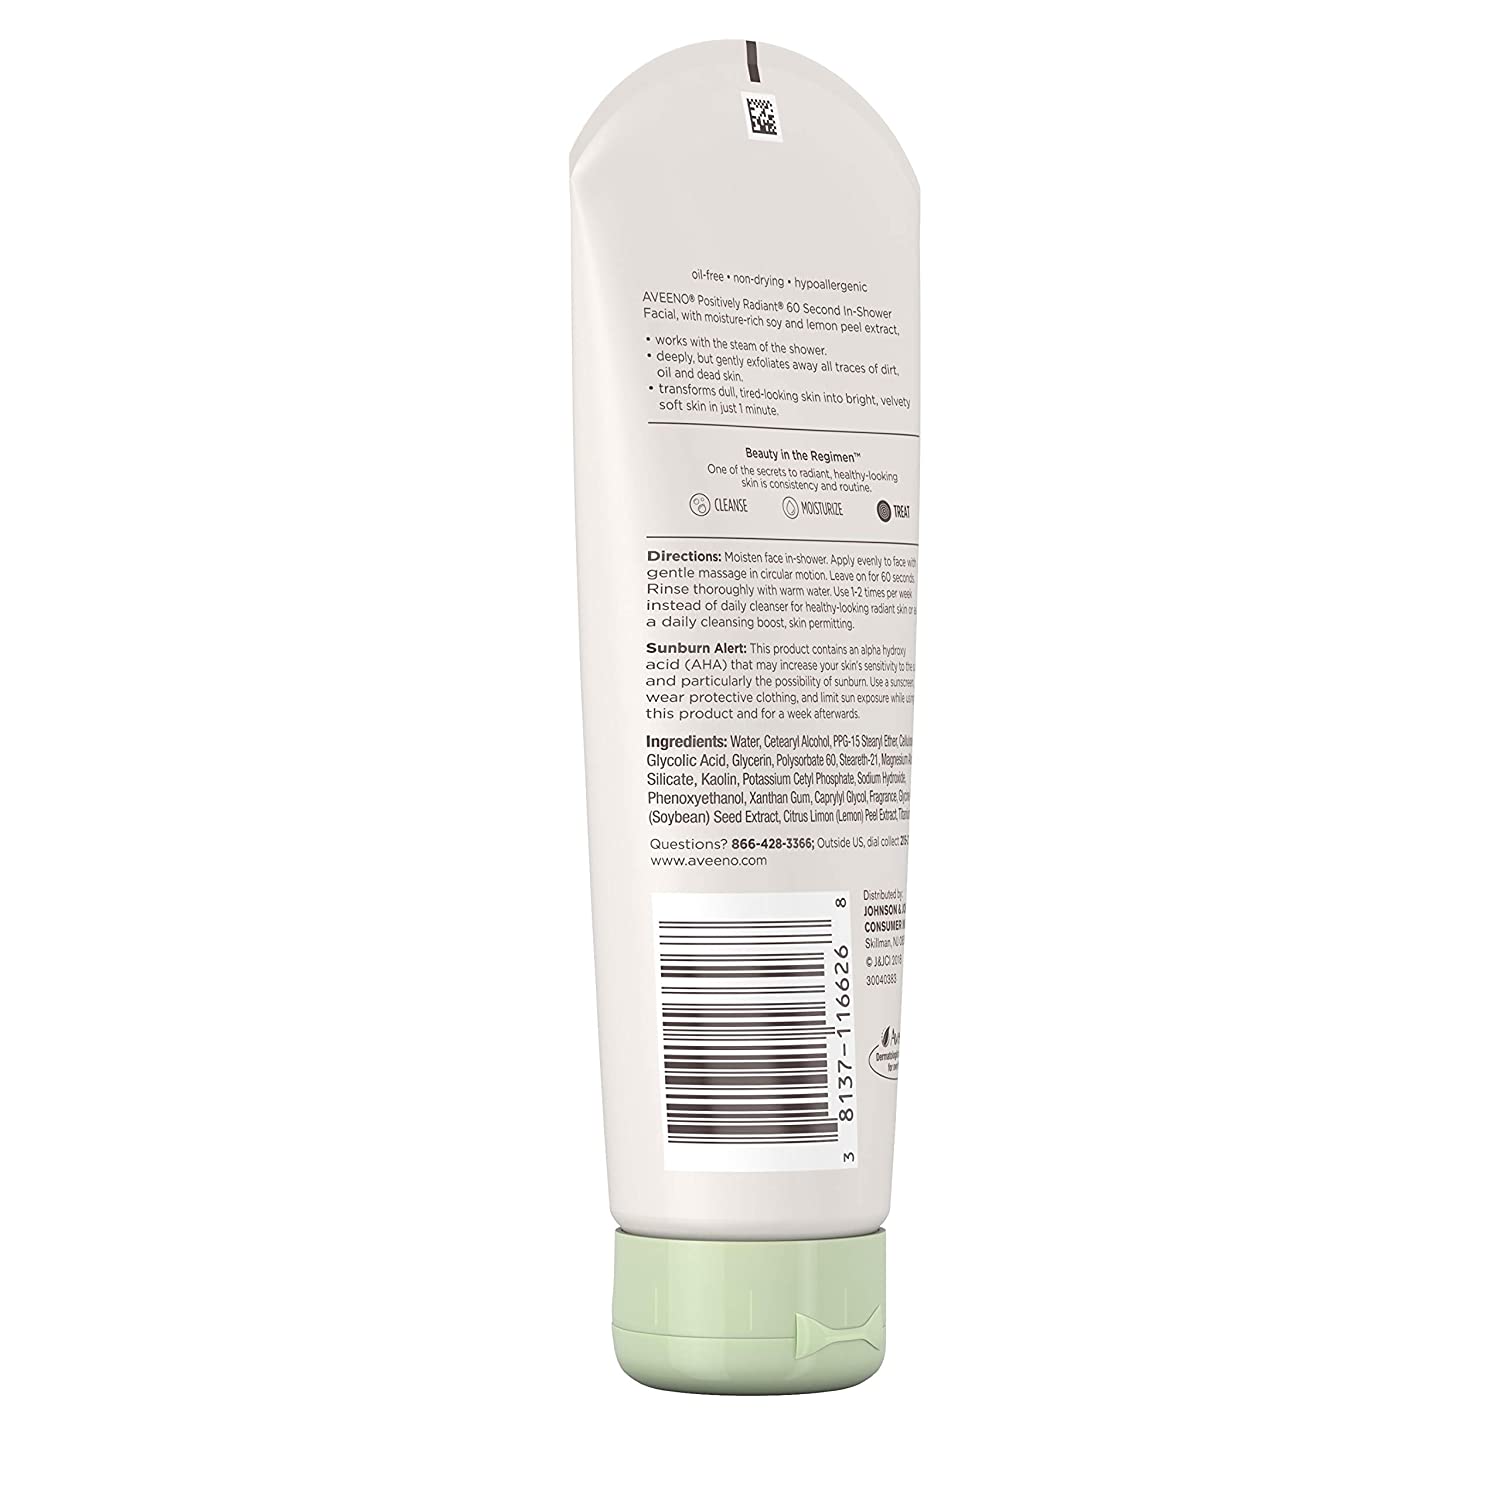 Aveeno Active Naturals Positively Radiant 60 Second In-Shower Facial Cleanser 5 oz (Pack of 4) - image 2 of 7